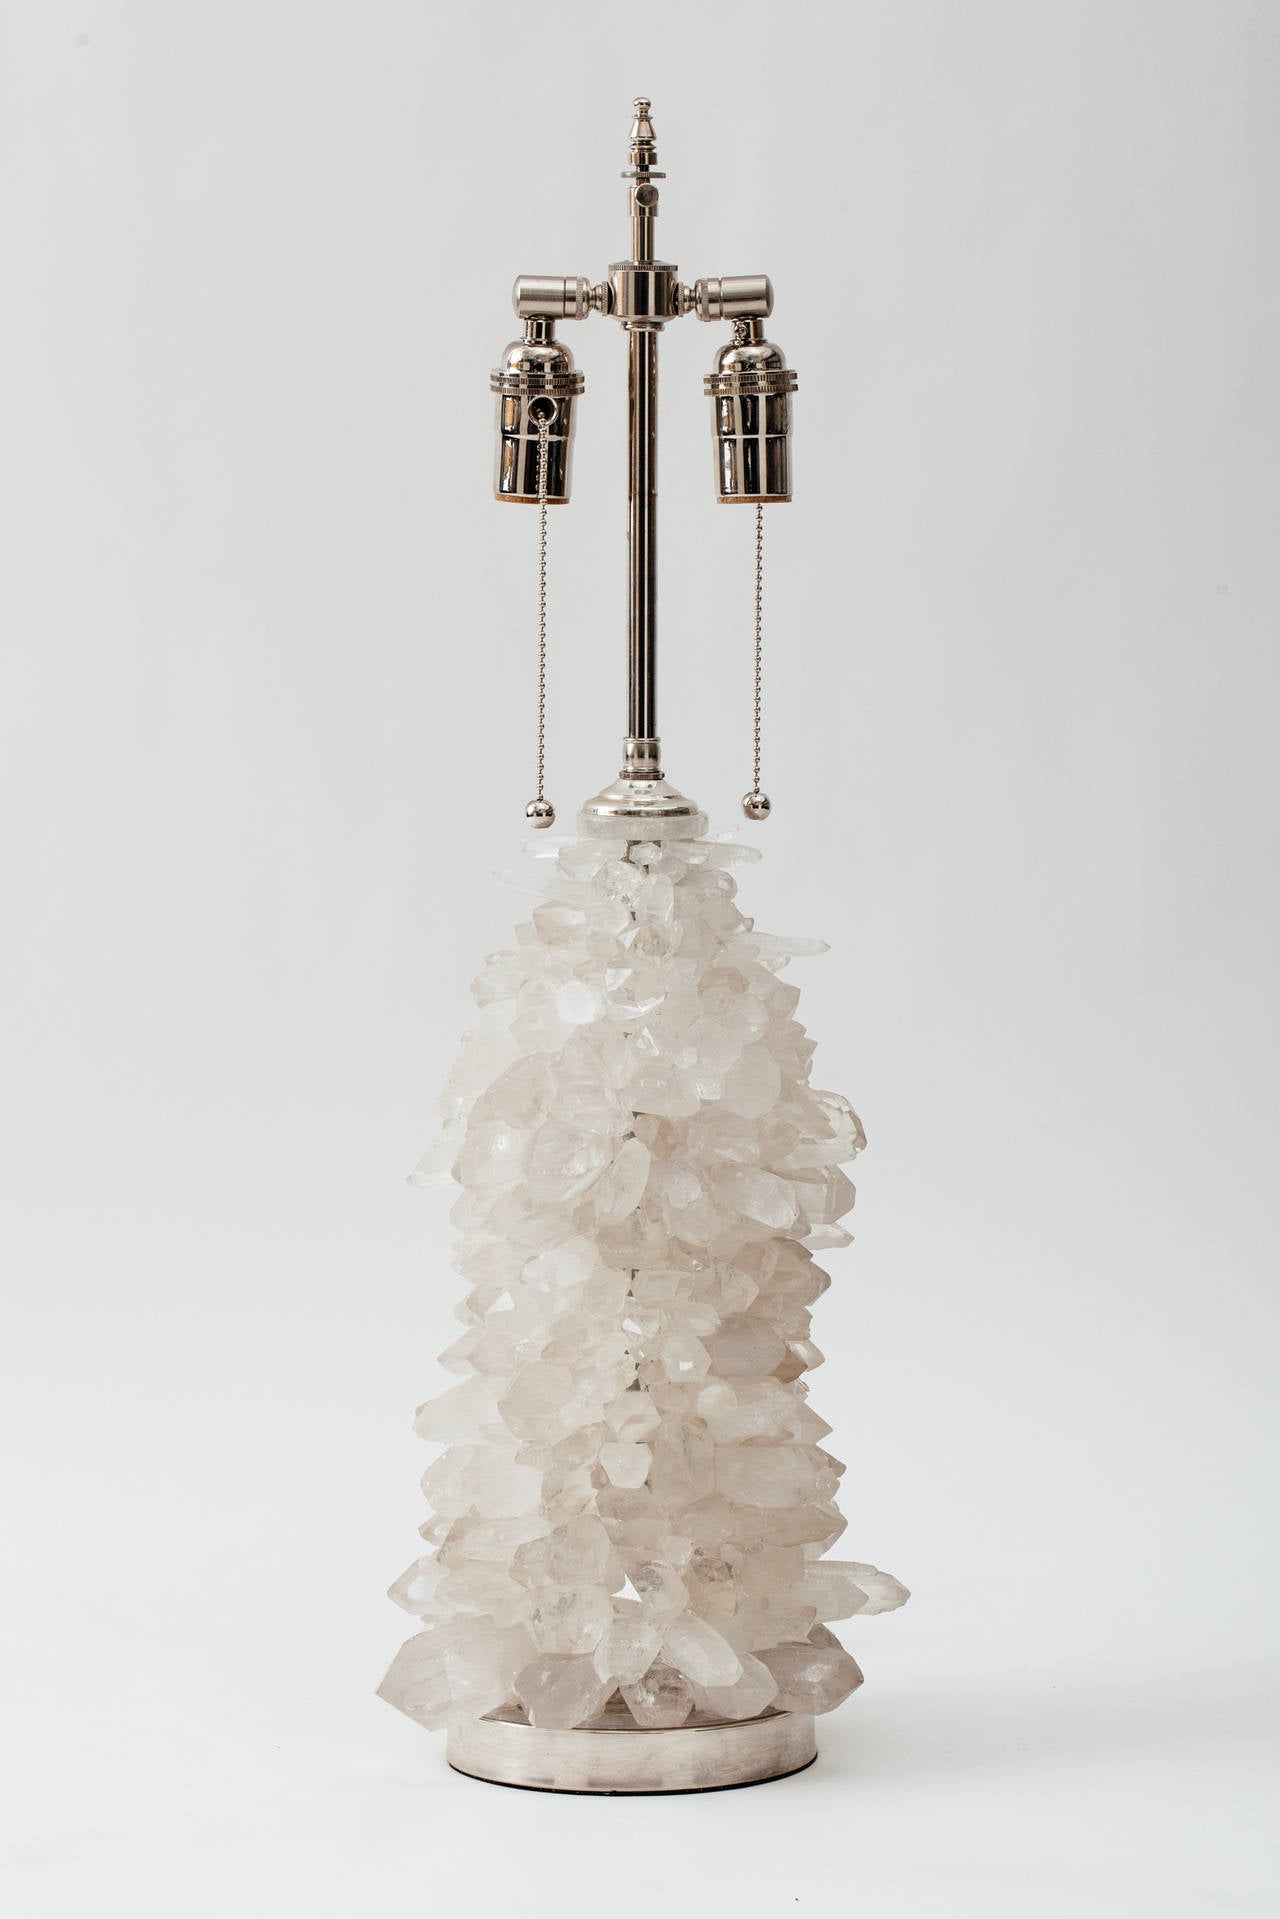 Pair of handcrafted rock crystal cluster lamps with nickel-plated solid brass bases and hardware. Lamp body height 15 inches. Overall height 29 inches. Double socketed with pull chain switches. 100 max wattage per socket. May be custom ordered in